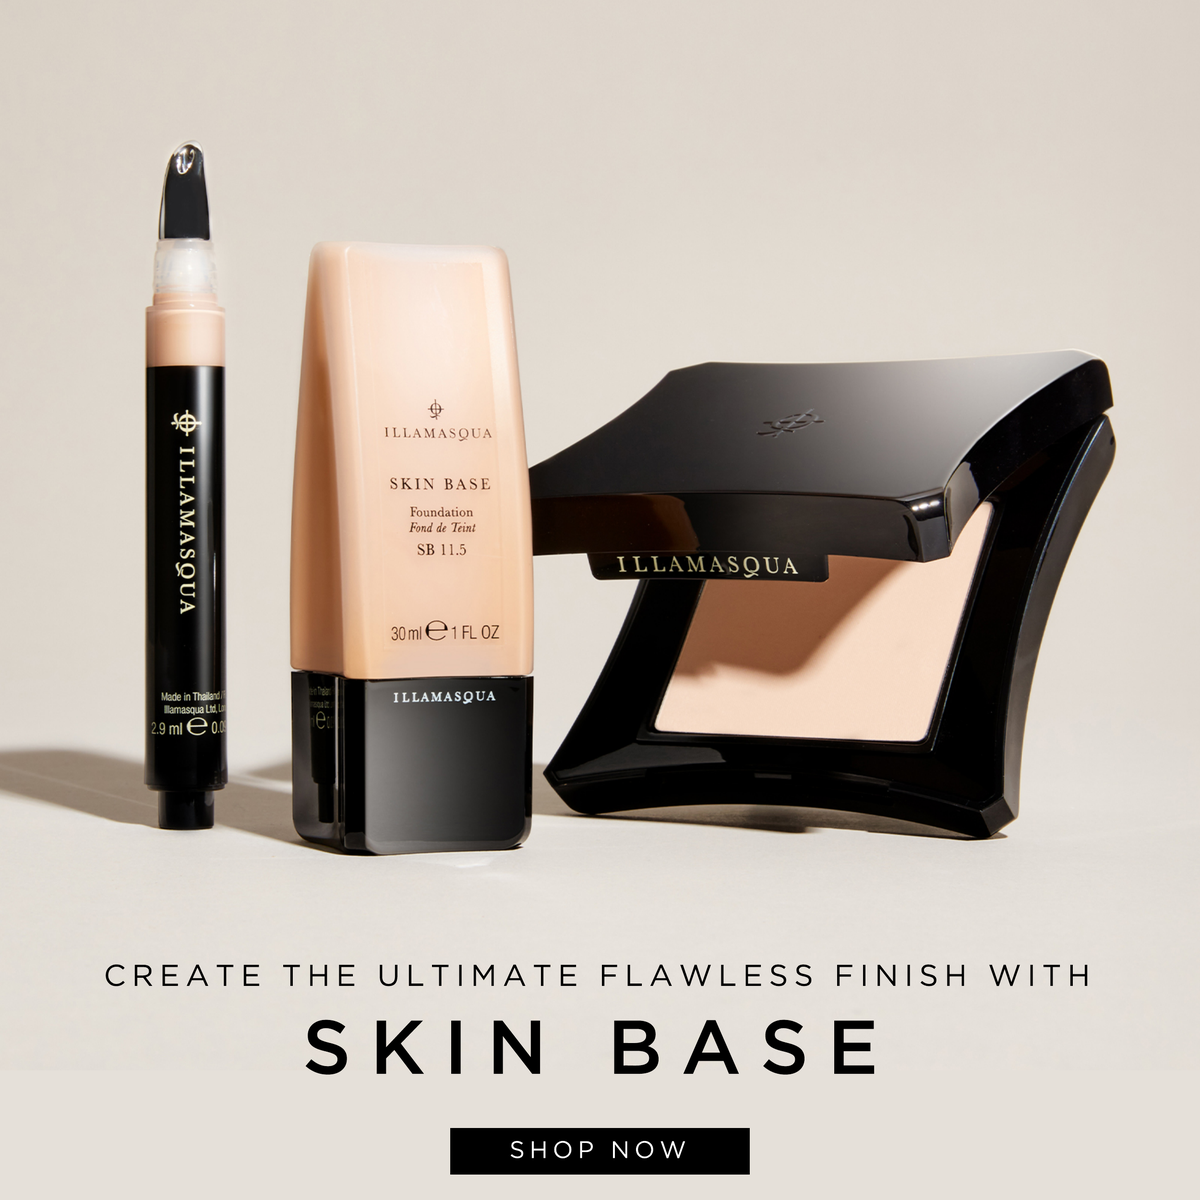 Create the ultimate flawless finish with SKIN BASE